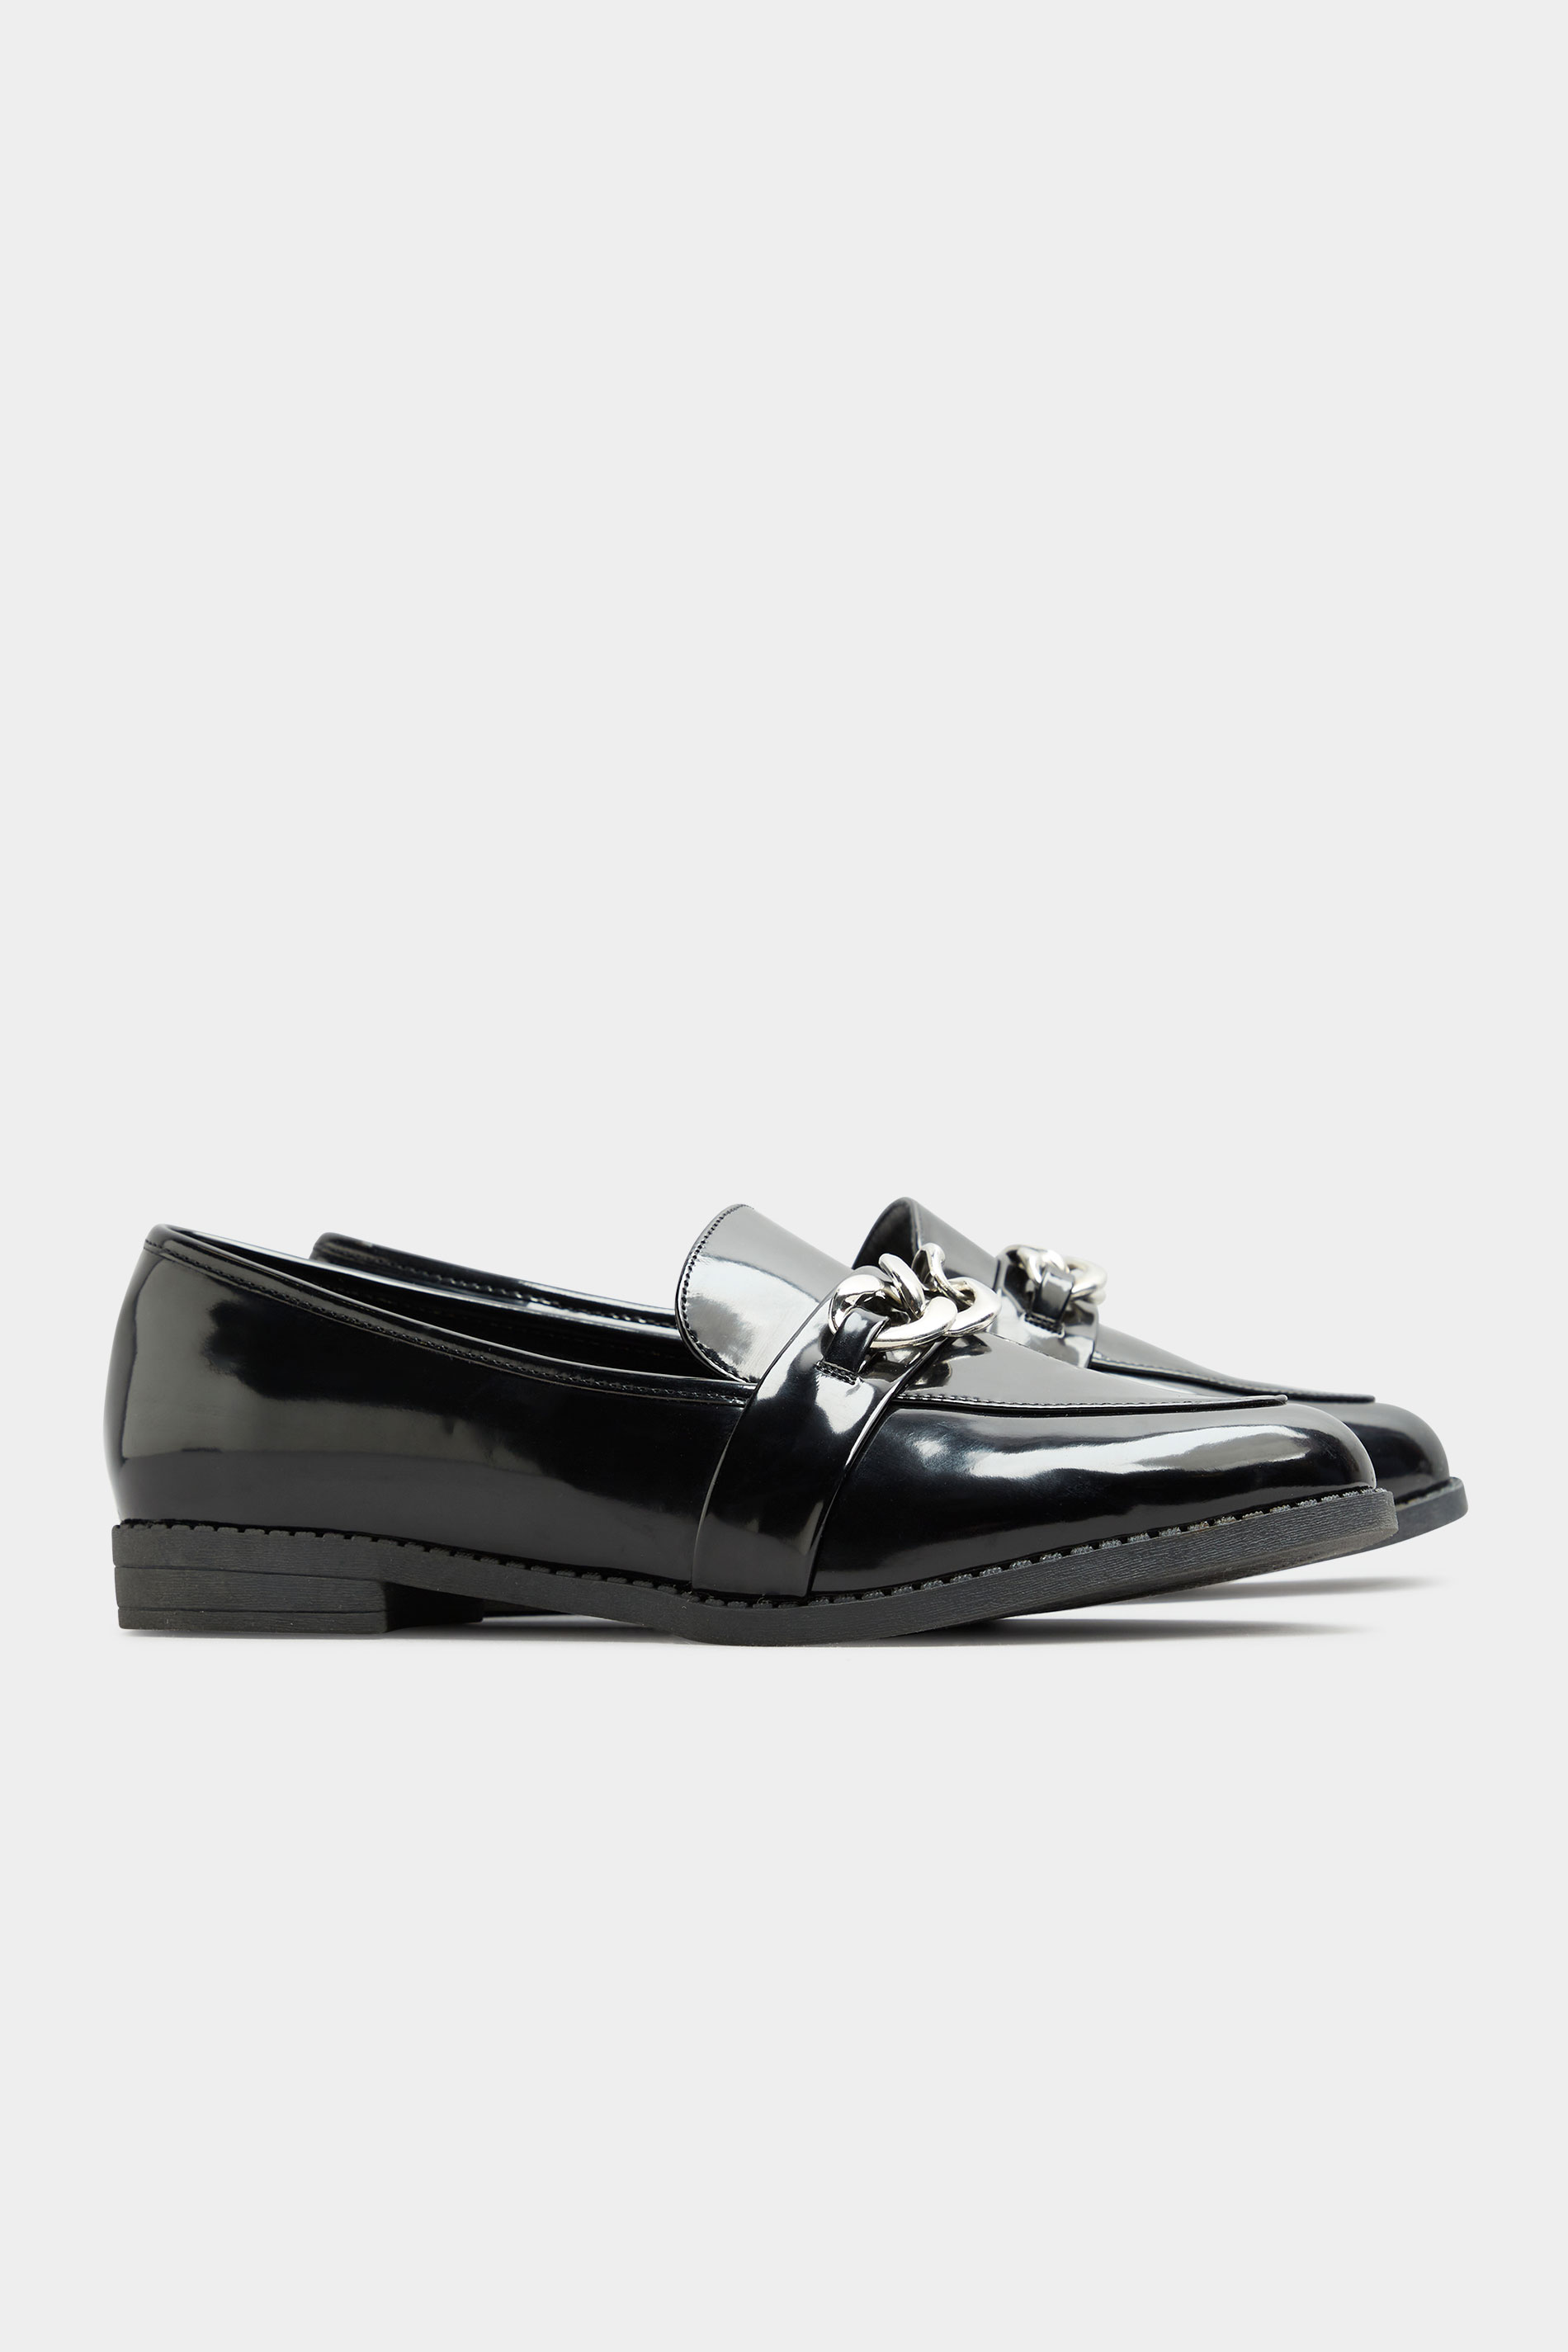 LIMITED COLLECTON Black Patent Chain Loafers In Extra Wide Fit_c.jpg